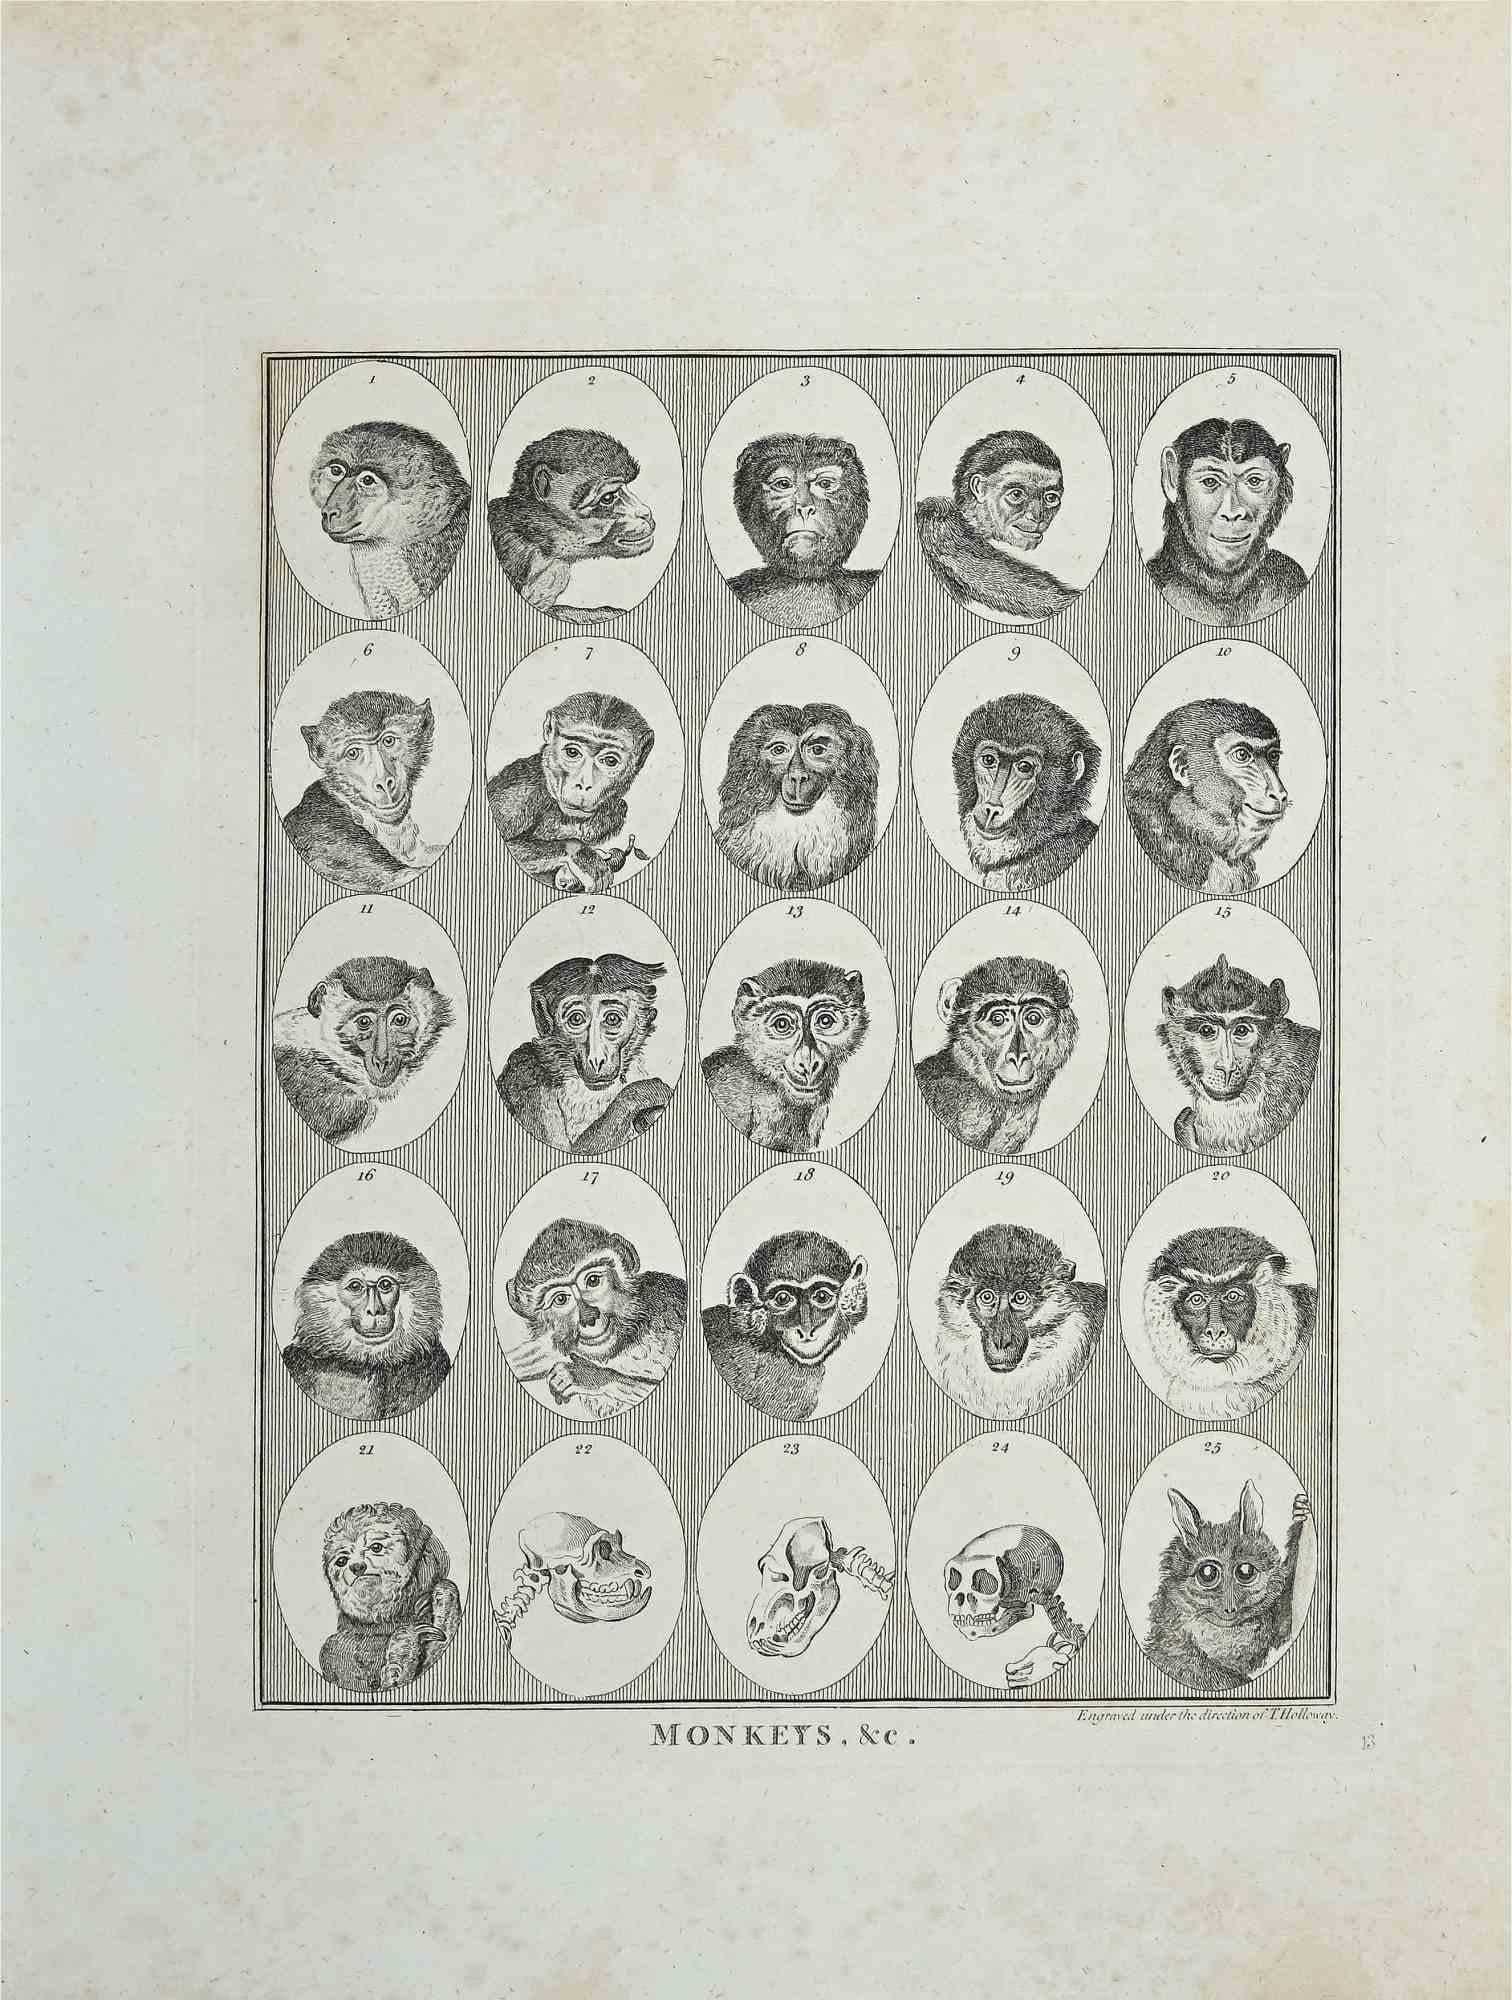 Monkeys is an original artwork realized by Thomas Holloway (1748 - 1827).

Original Etching from J.C. Lavater's "Essays on Physiognomy, Designed to promote the Knowledge and the Love of Mankind", London, Bensley, 1810. 

This artwork portrays